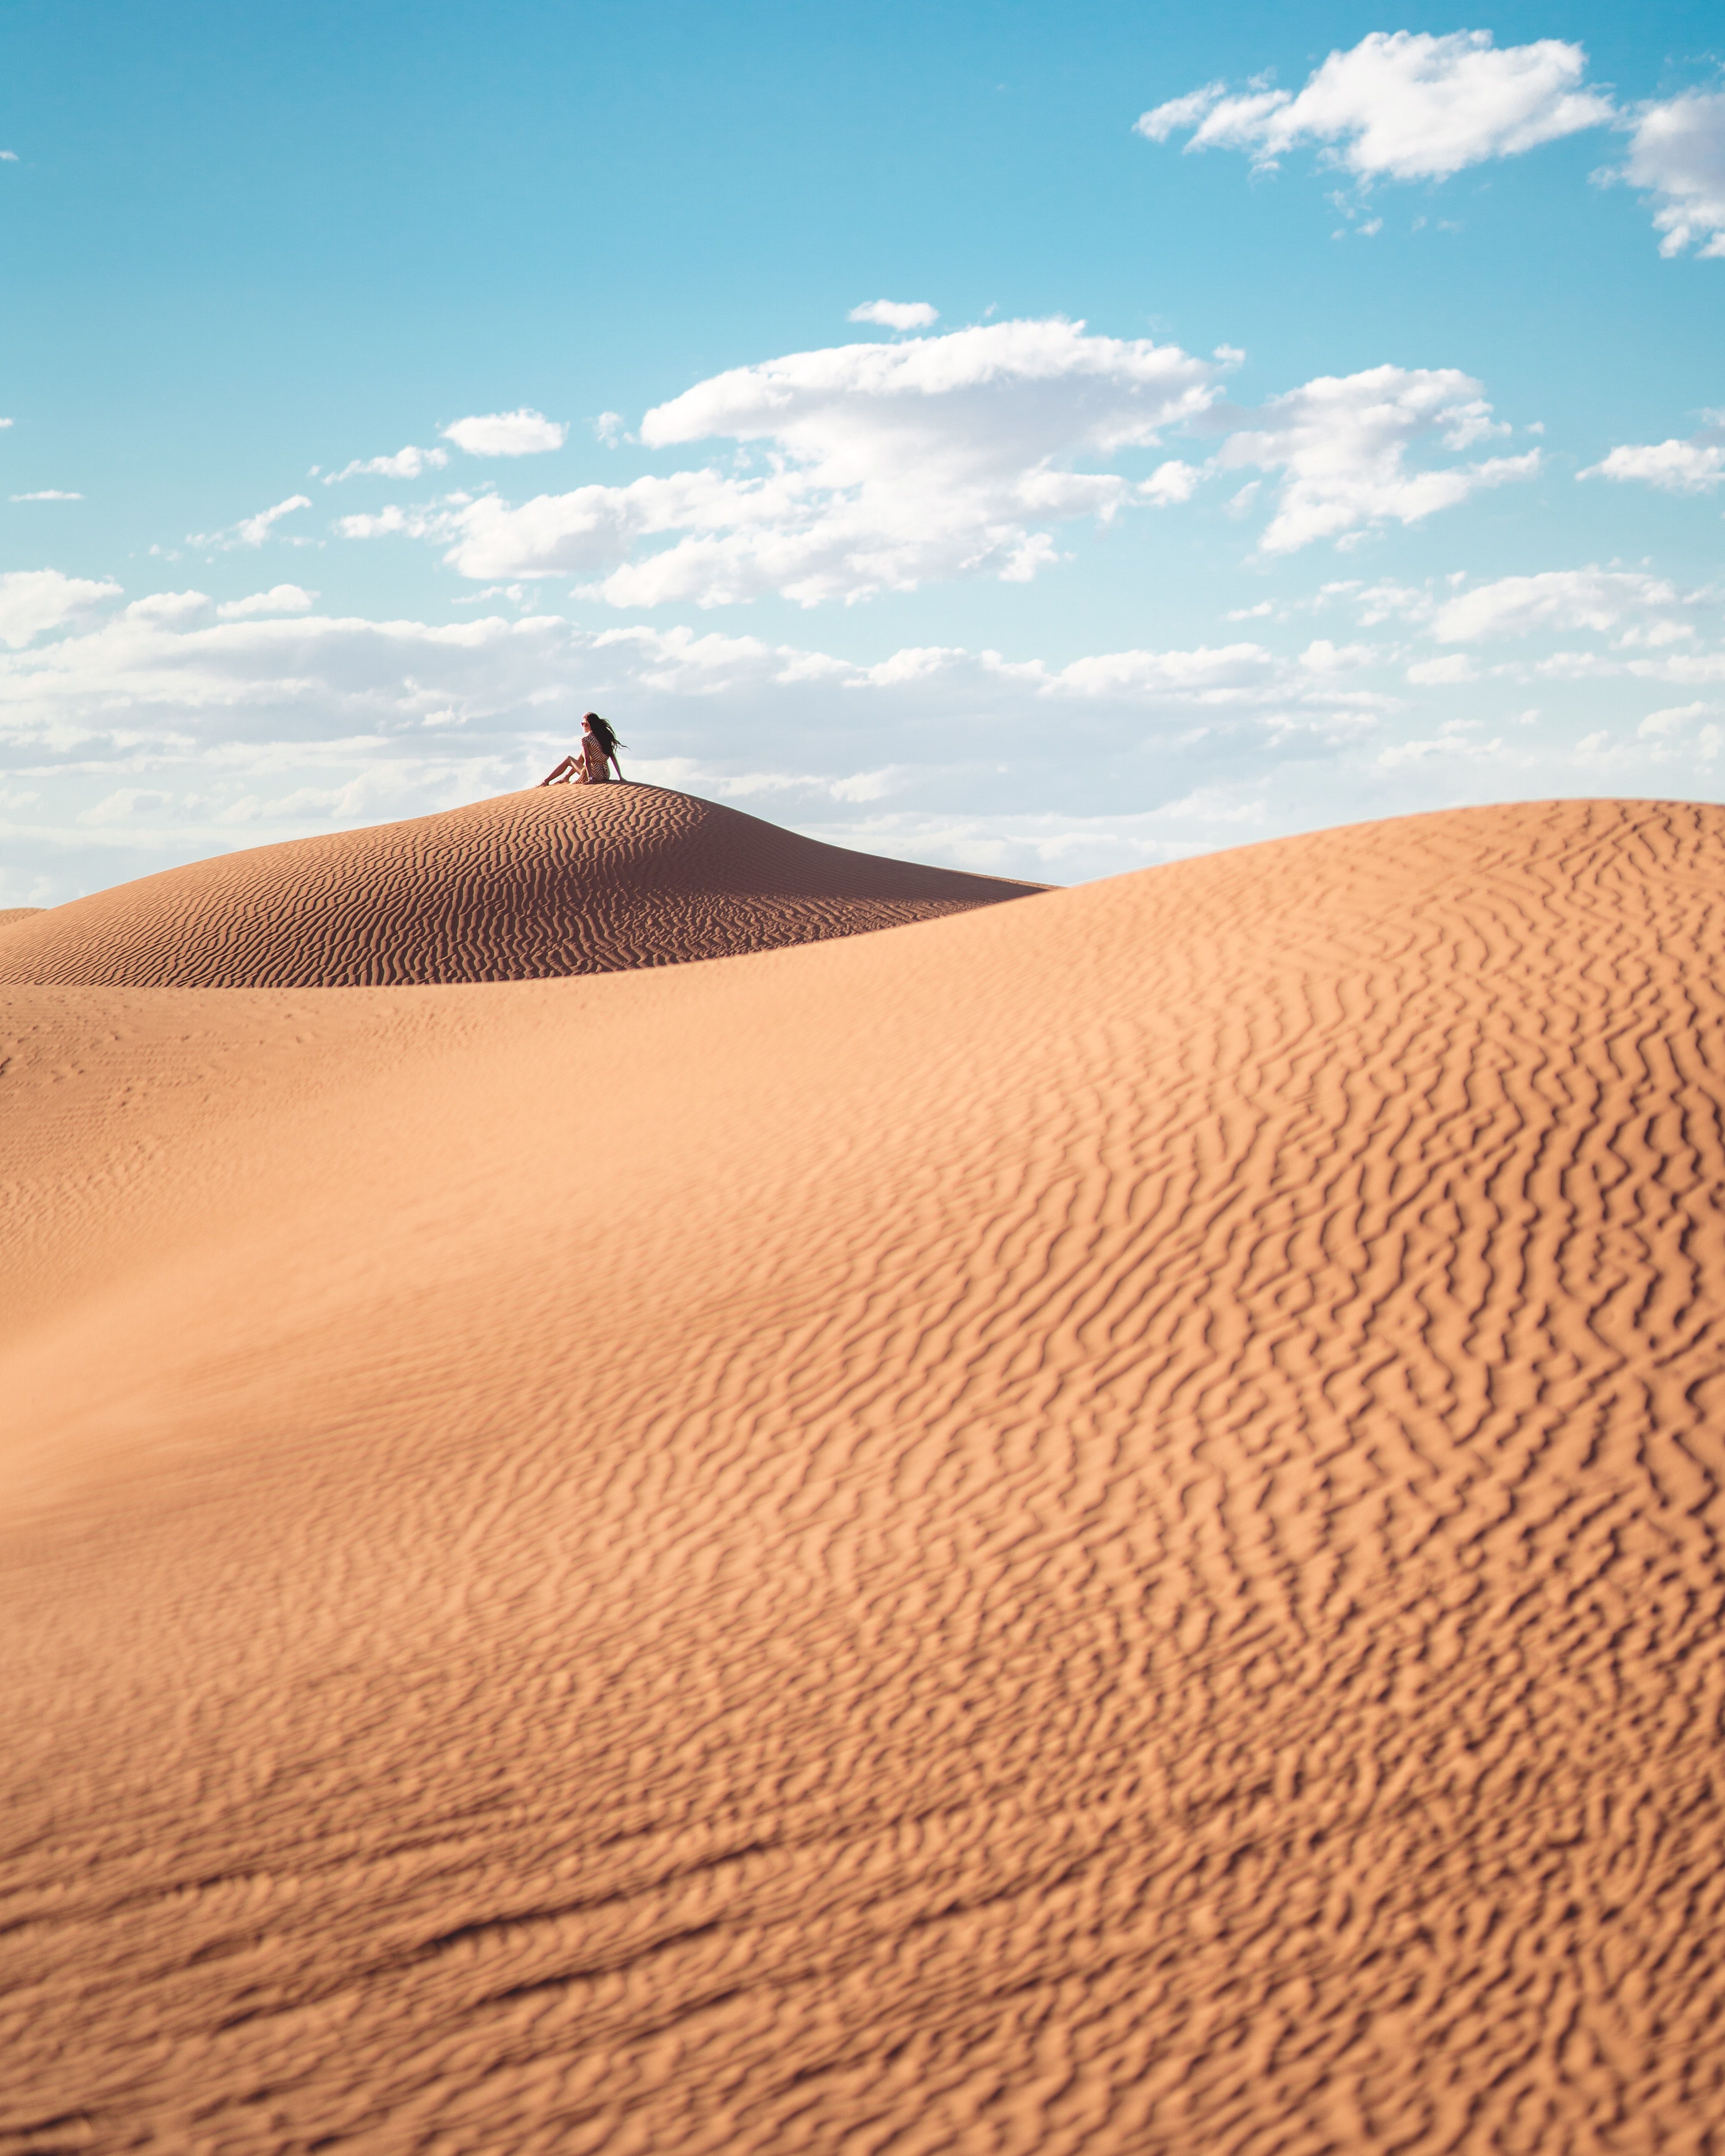 A person standing on top of a sand dune in the desert. - Desert